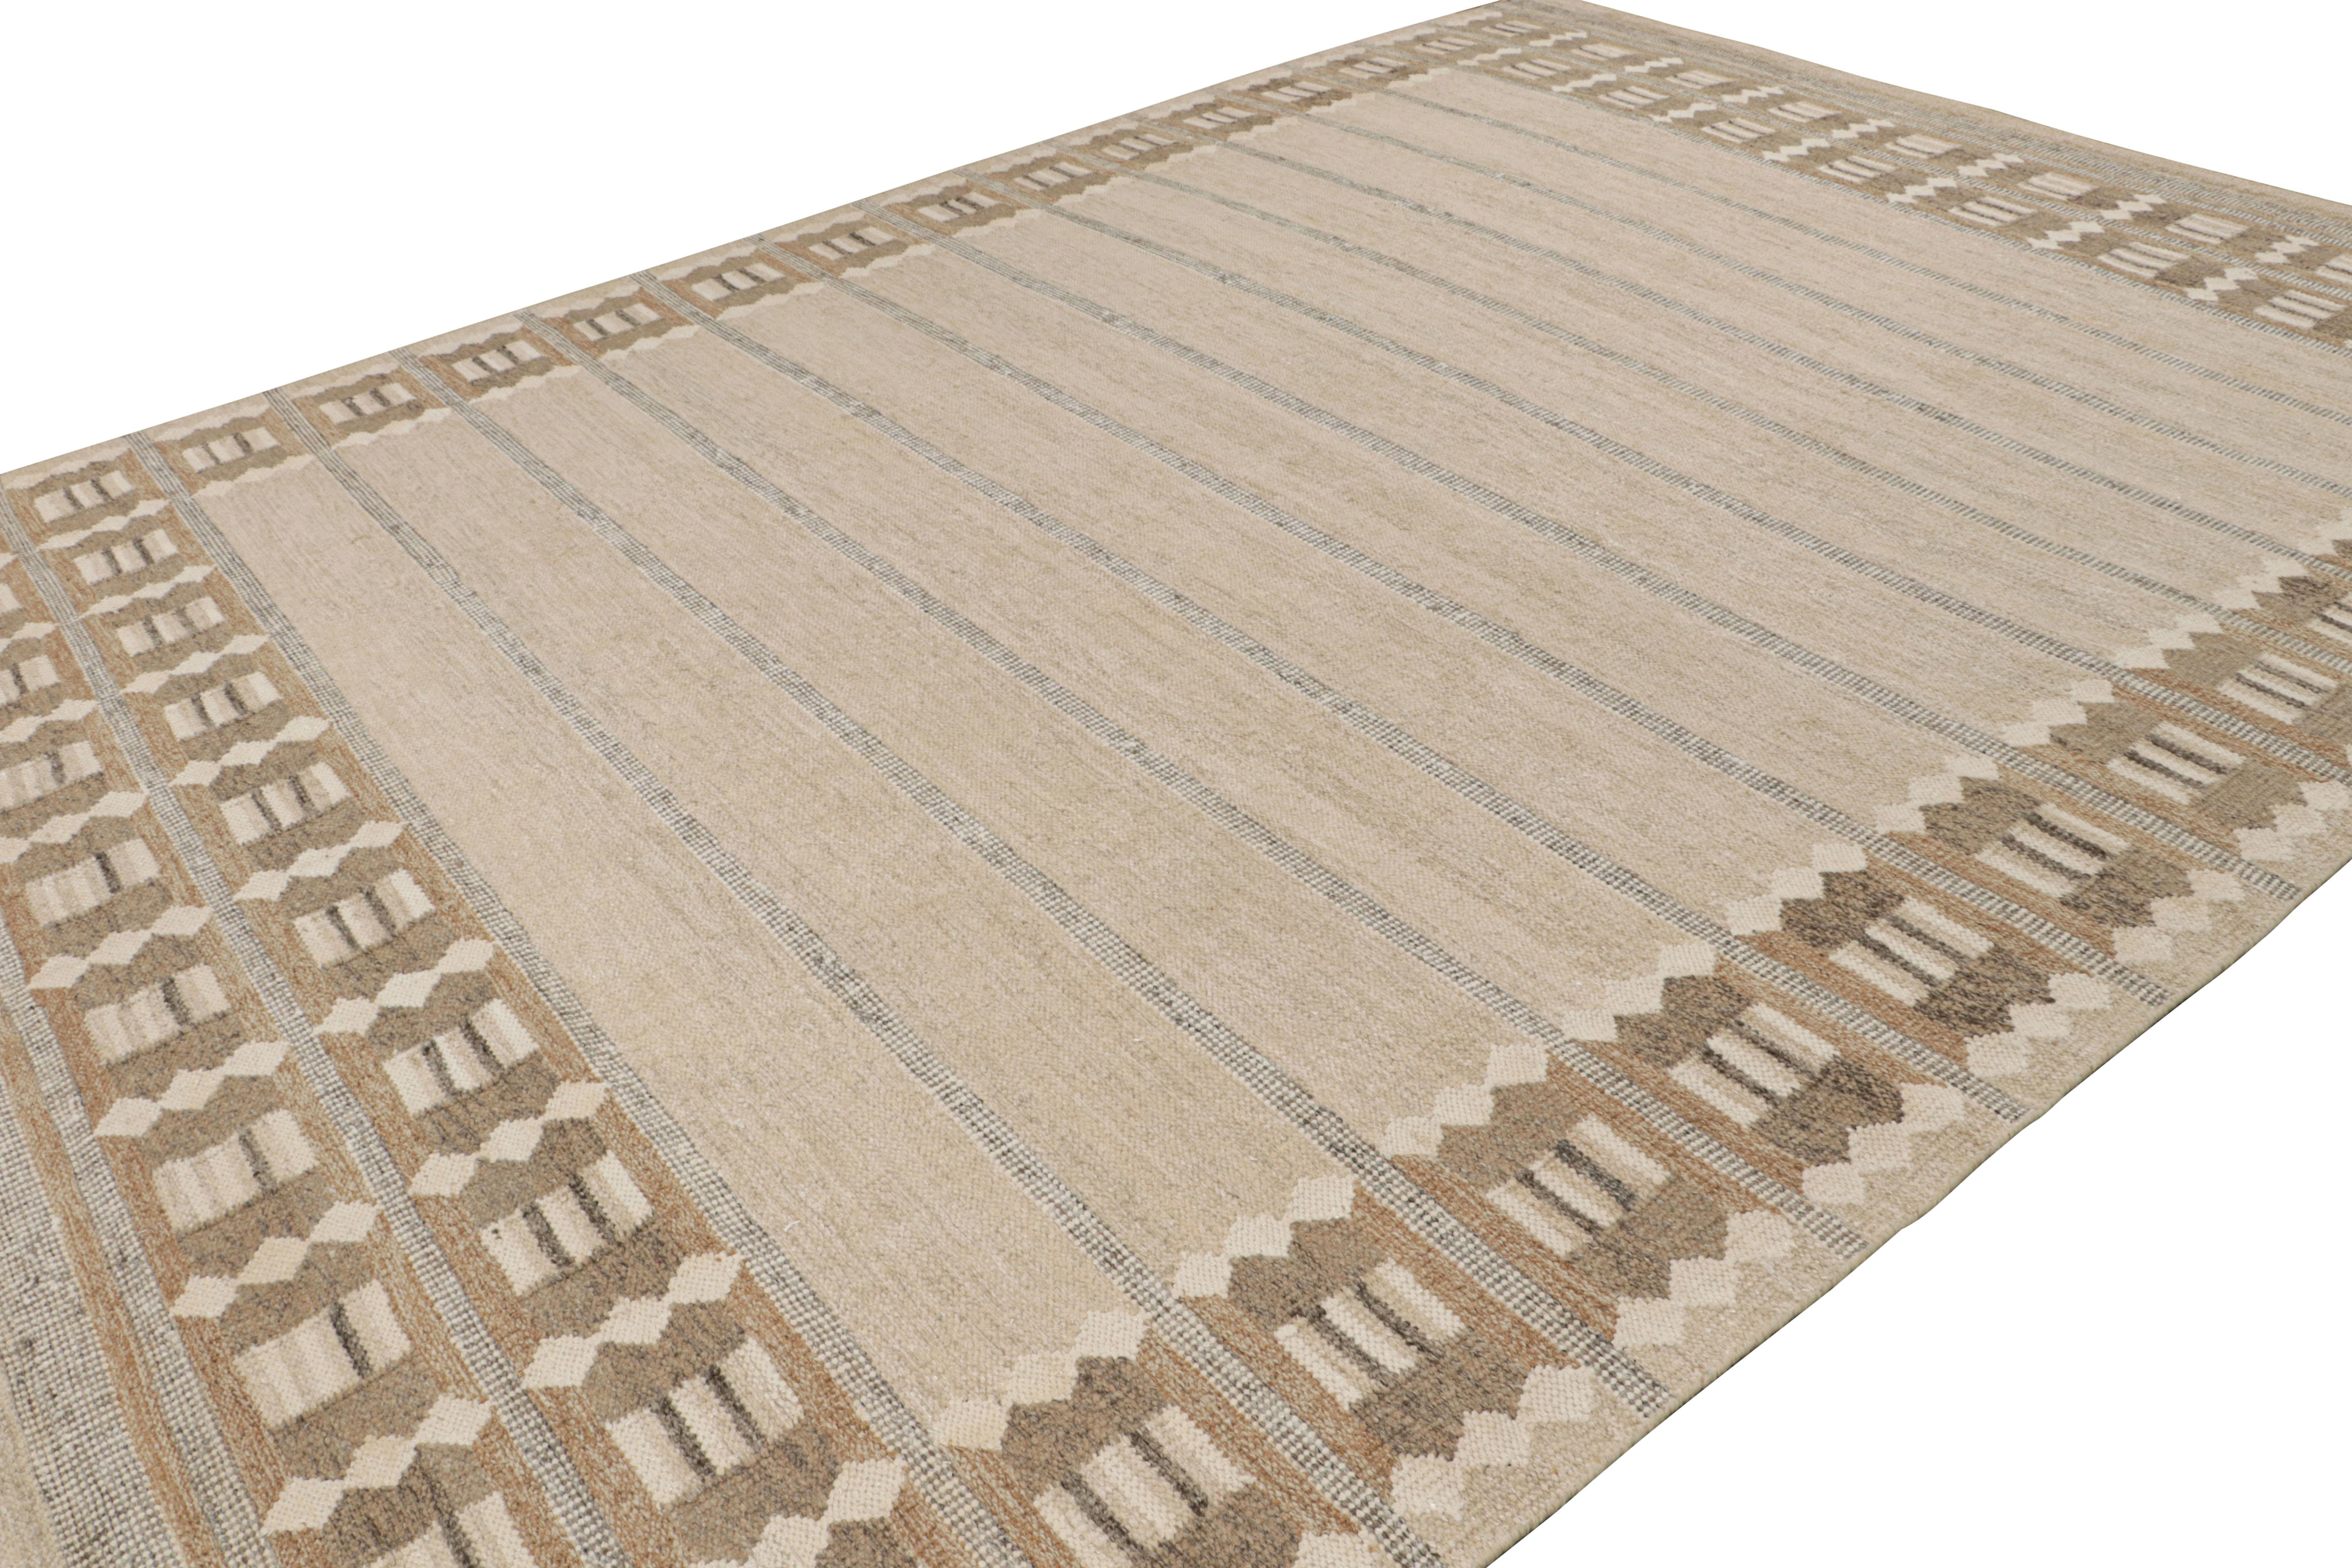 Hand-knotted in aloe, this 11x15 Scandinavian rug features beige-brown and other neutrals and earth tones underscoring a play of stripes and geometric patterns in field and border alike, all inspired by the Swedish minimalist aesthetic. 

On the